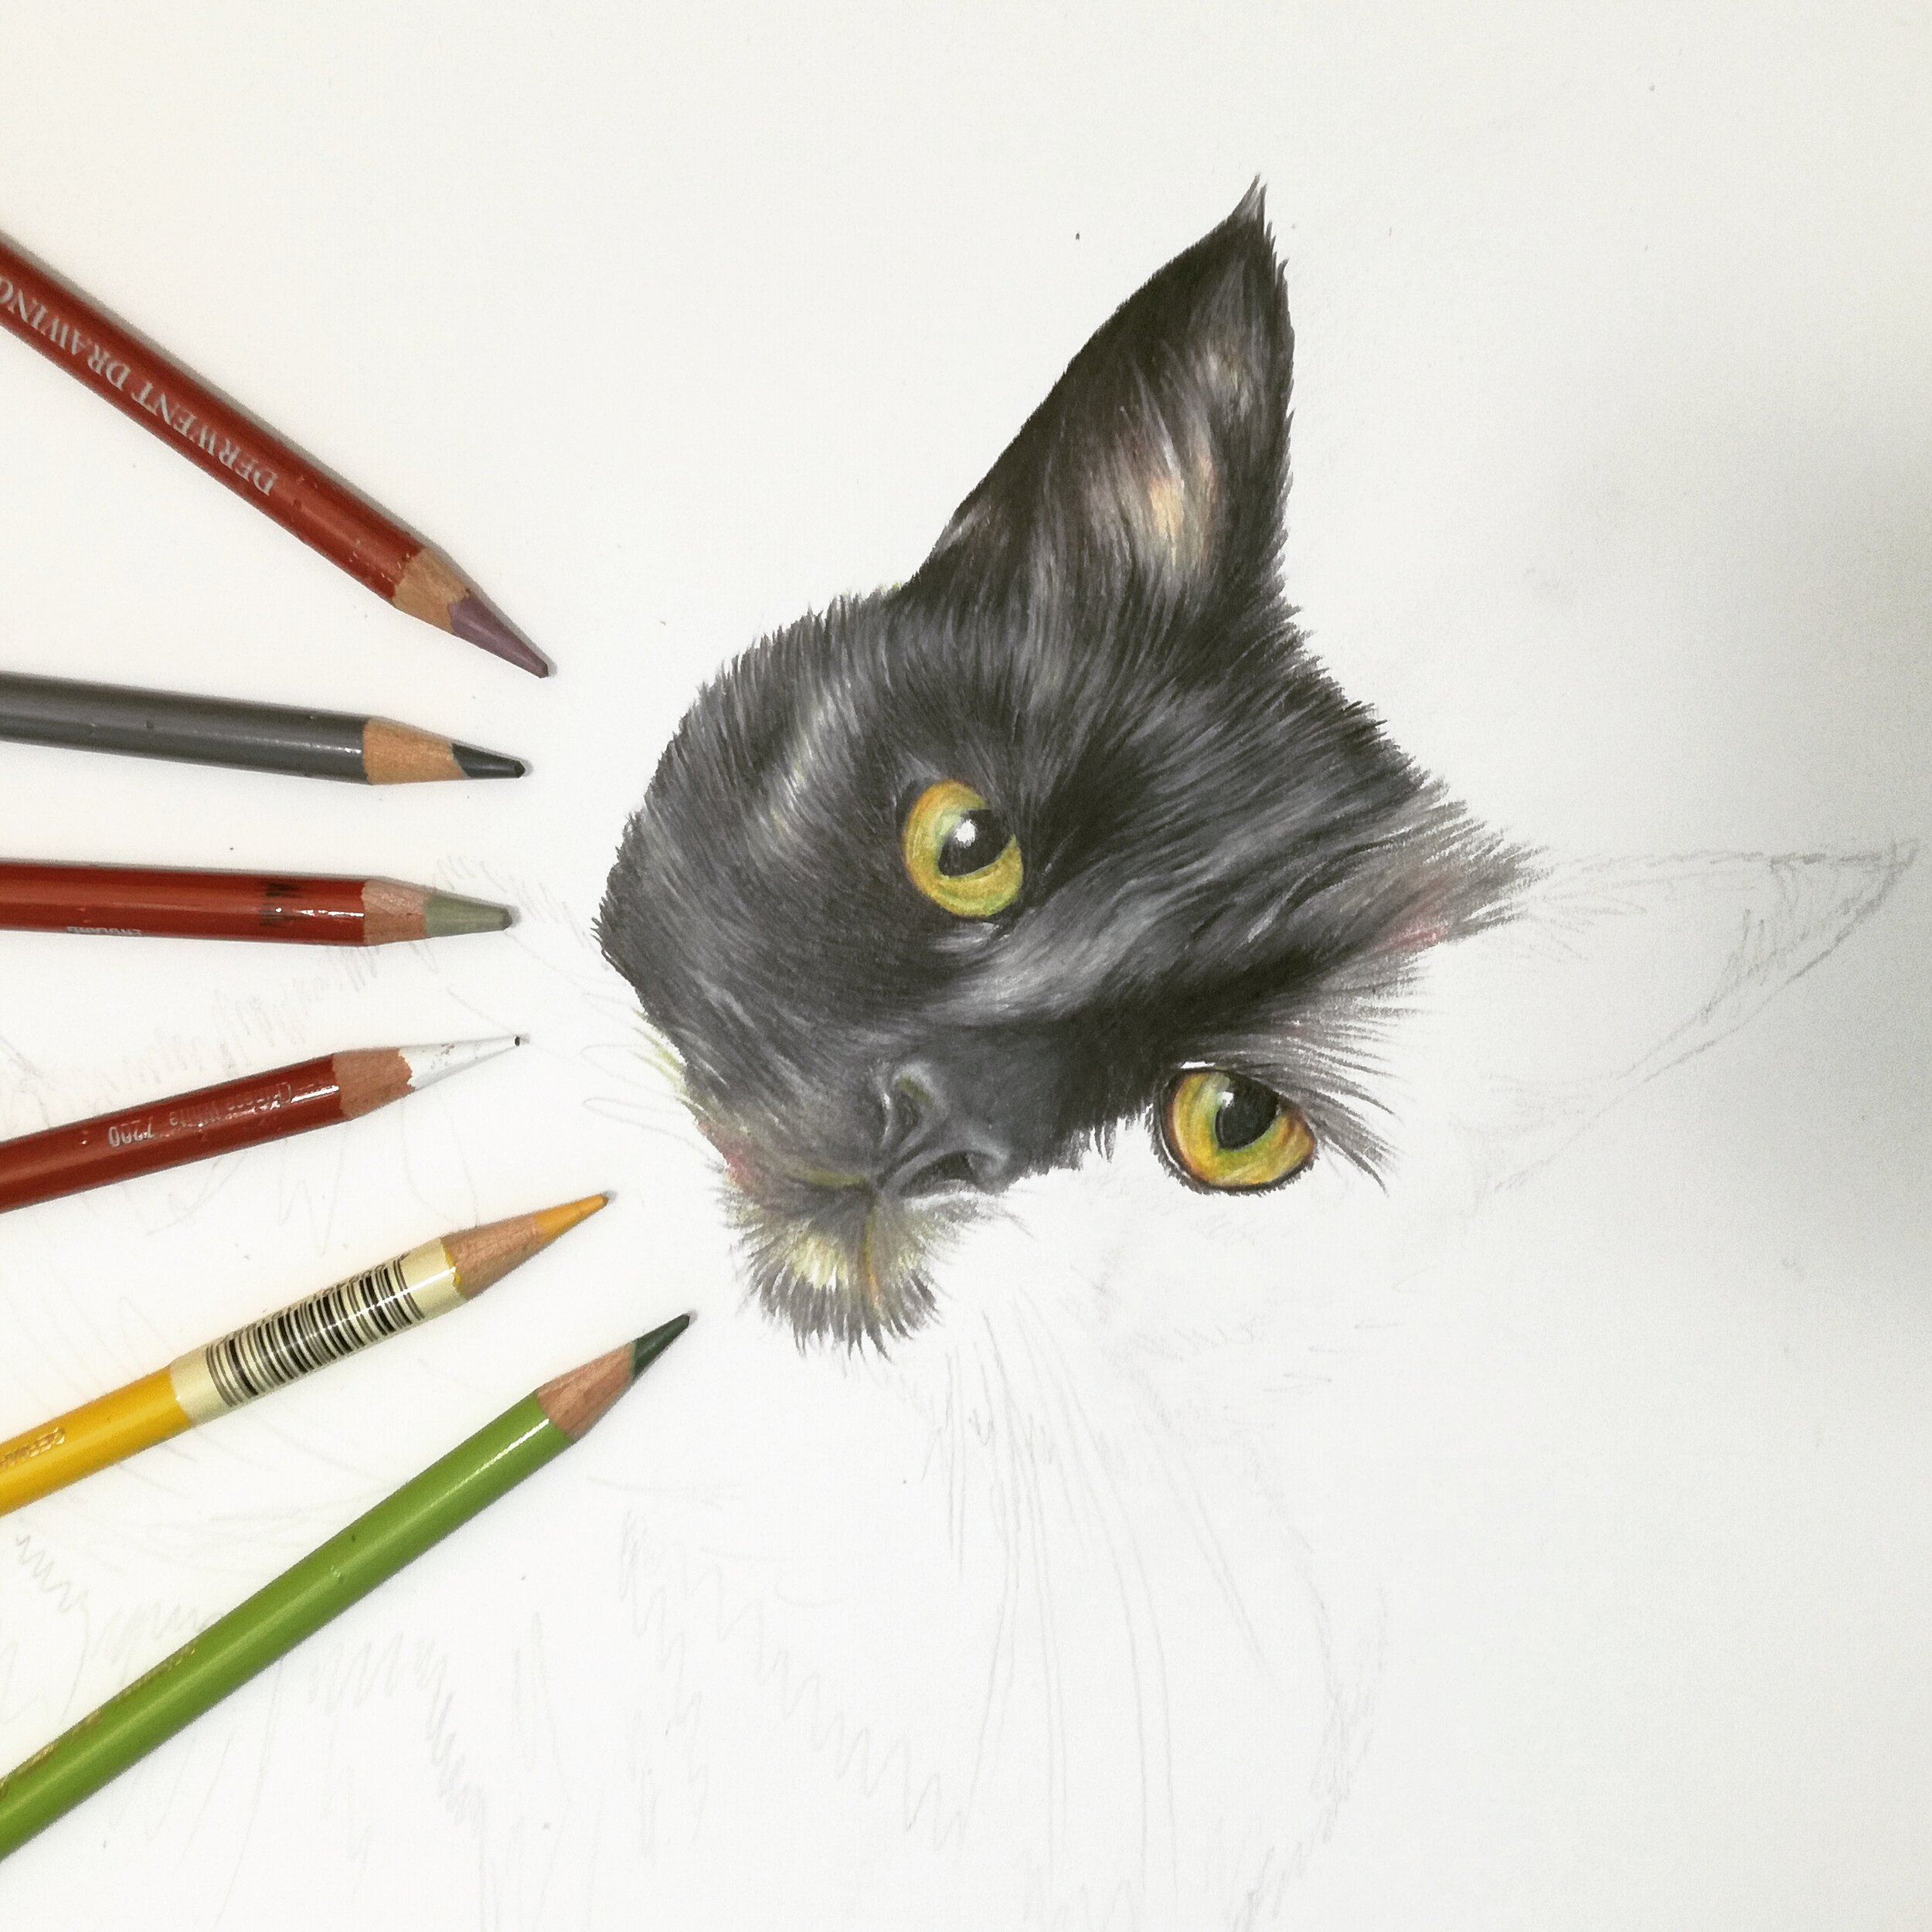 drawing of a black cat called Piggy by artist sema martin